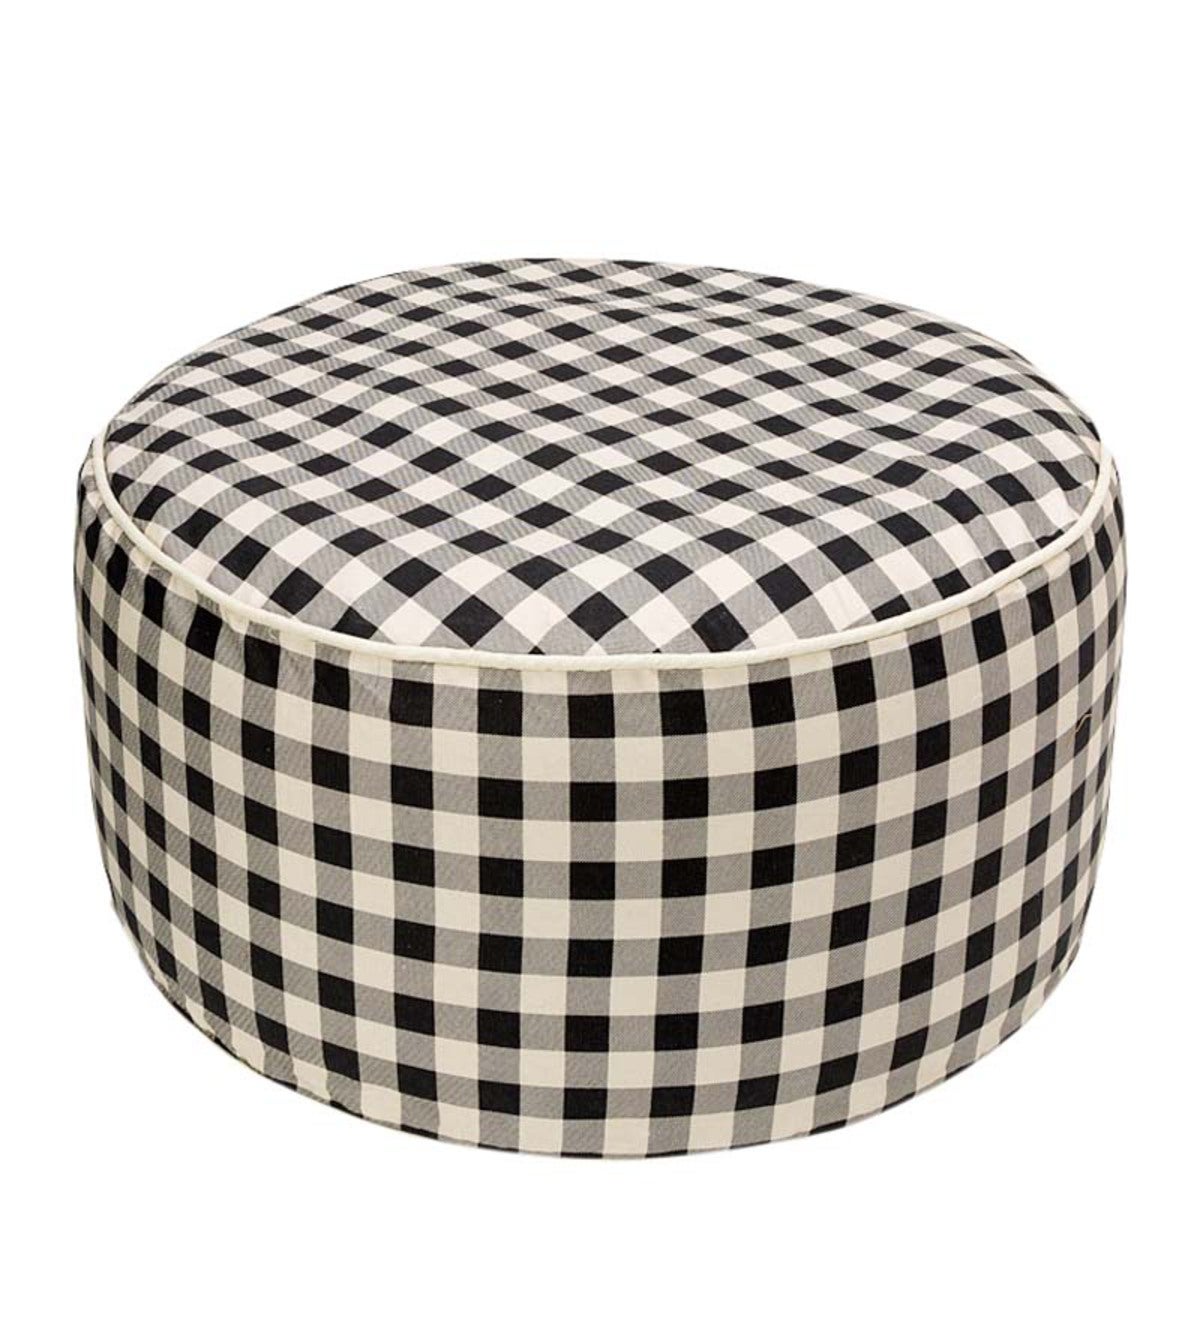 Small Round Inflatable Indoor Ottoman Pouf - Black Check | PlowHearth